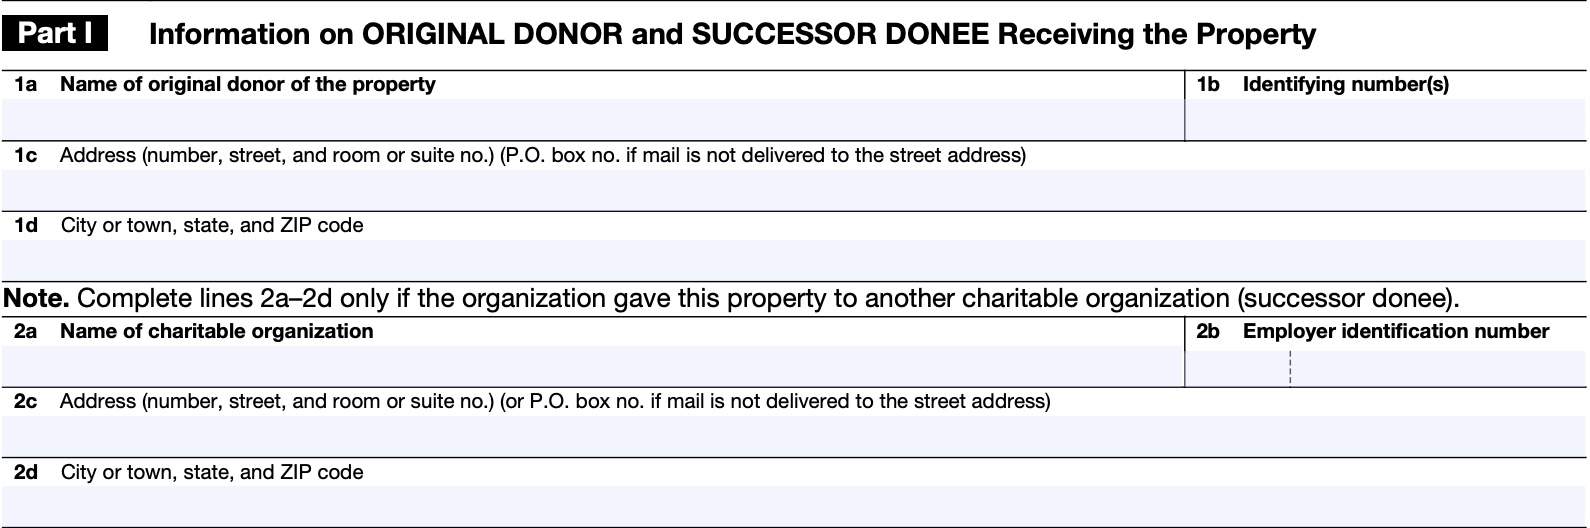 IRS Form 8282, Part I: information on original donor and successor donee receiving the property